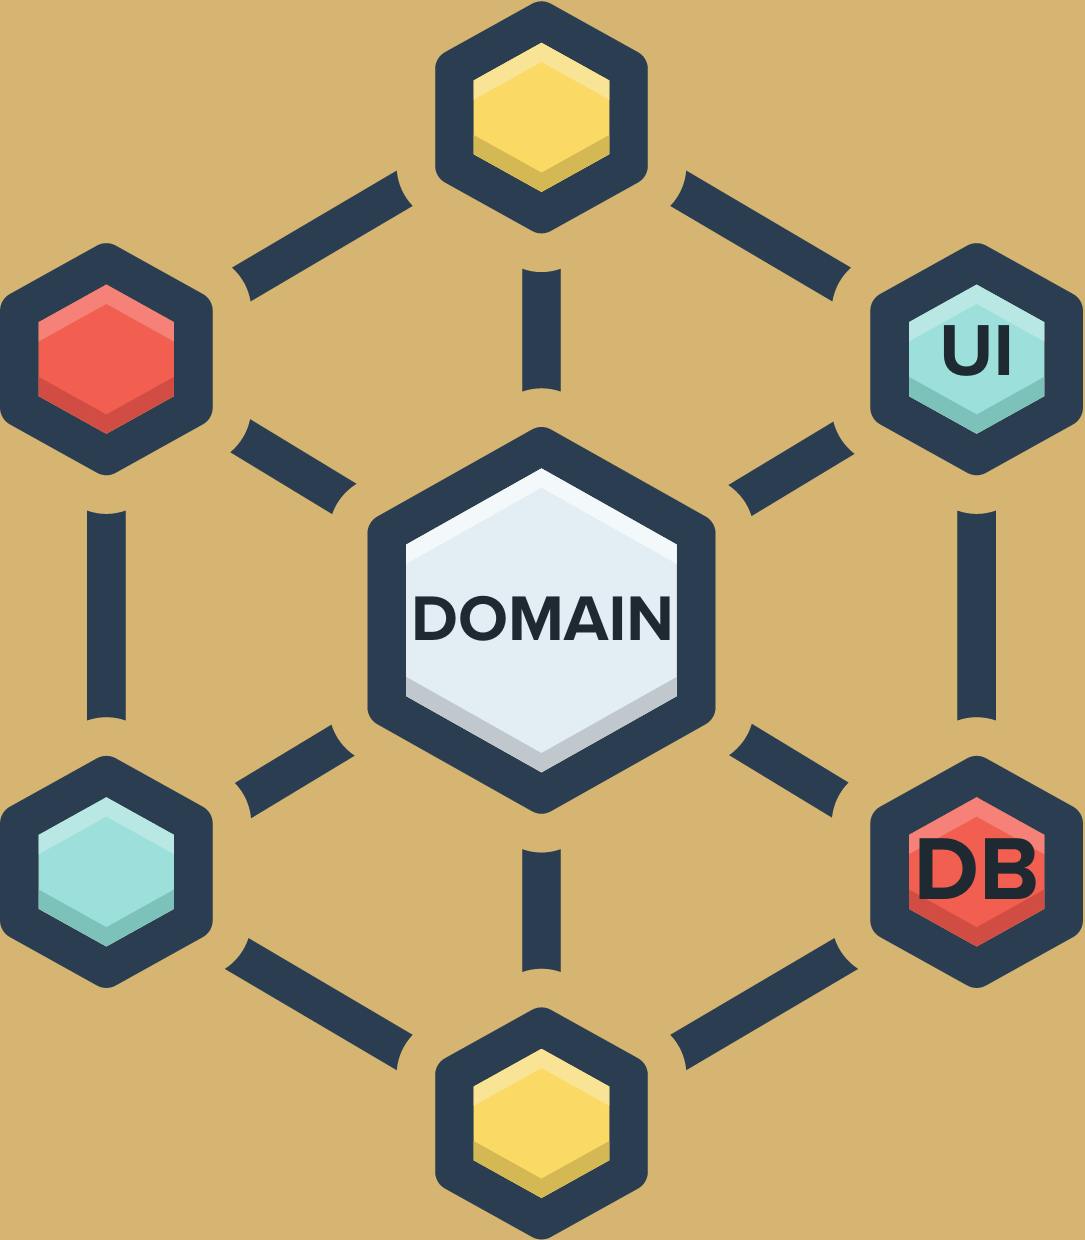 Hexagonal architecture - example with domain layer, UI and DB adapter